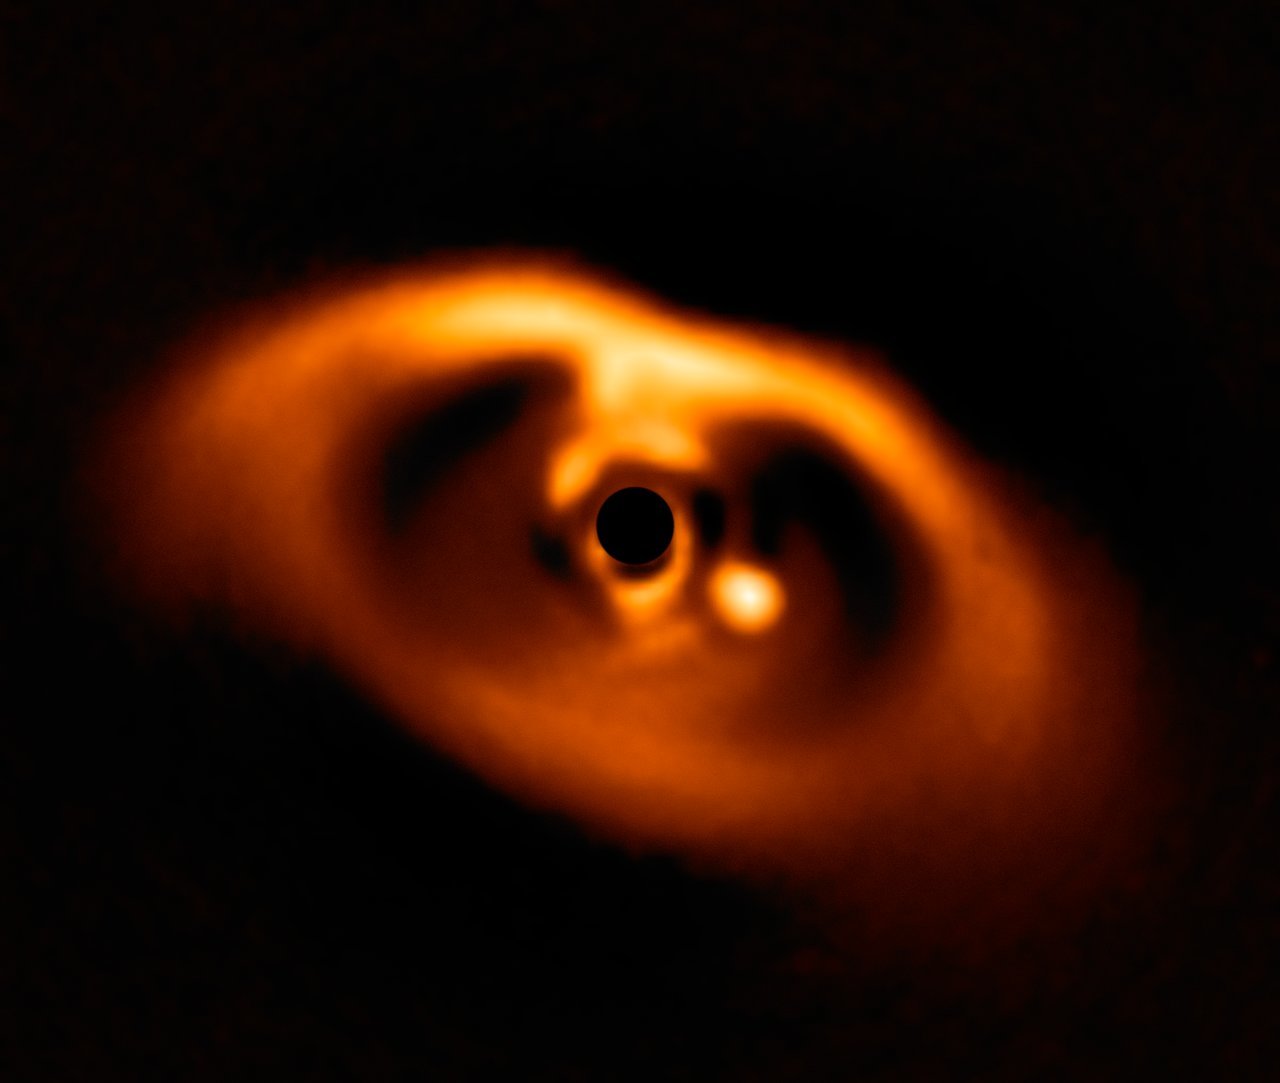 Image of a newborn planet forming around its star.